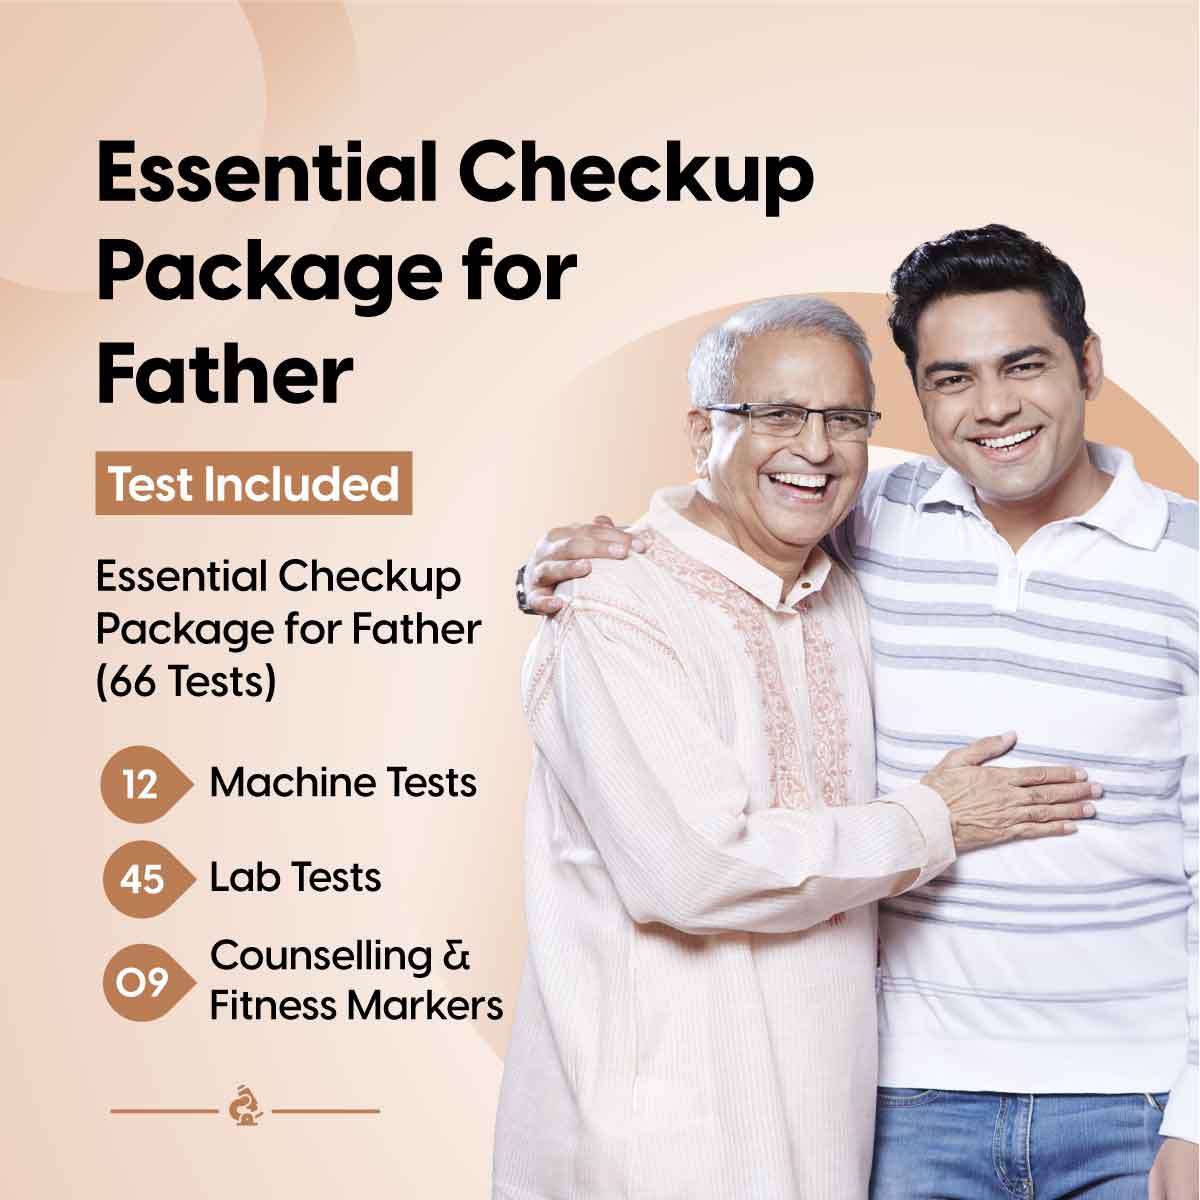 Essential Checkup Package for Father